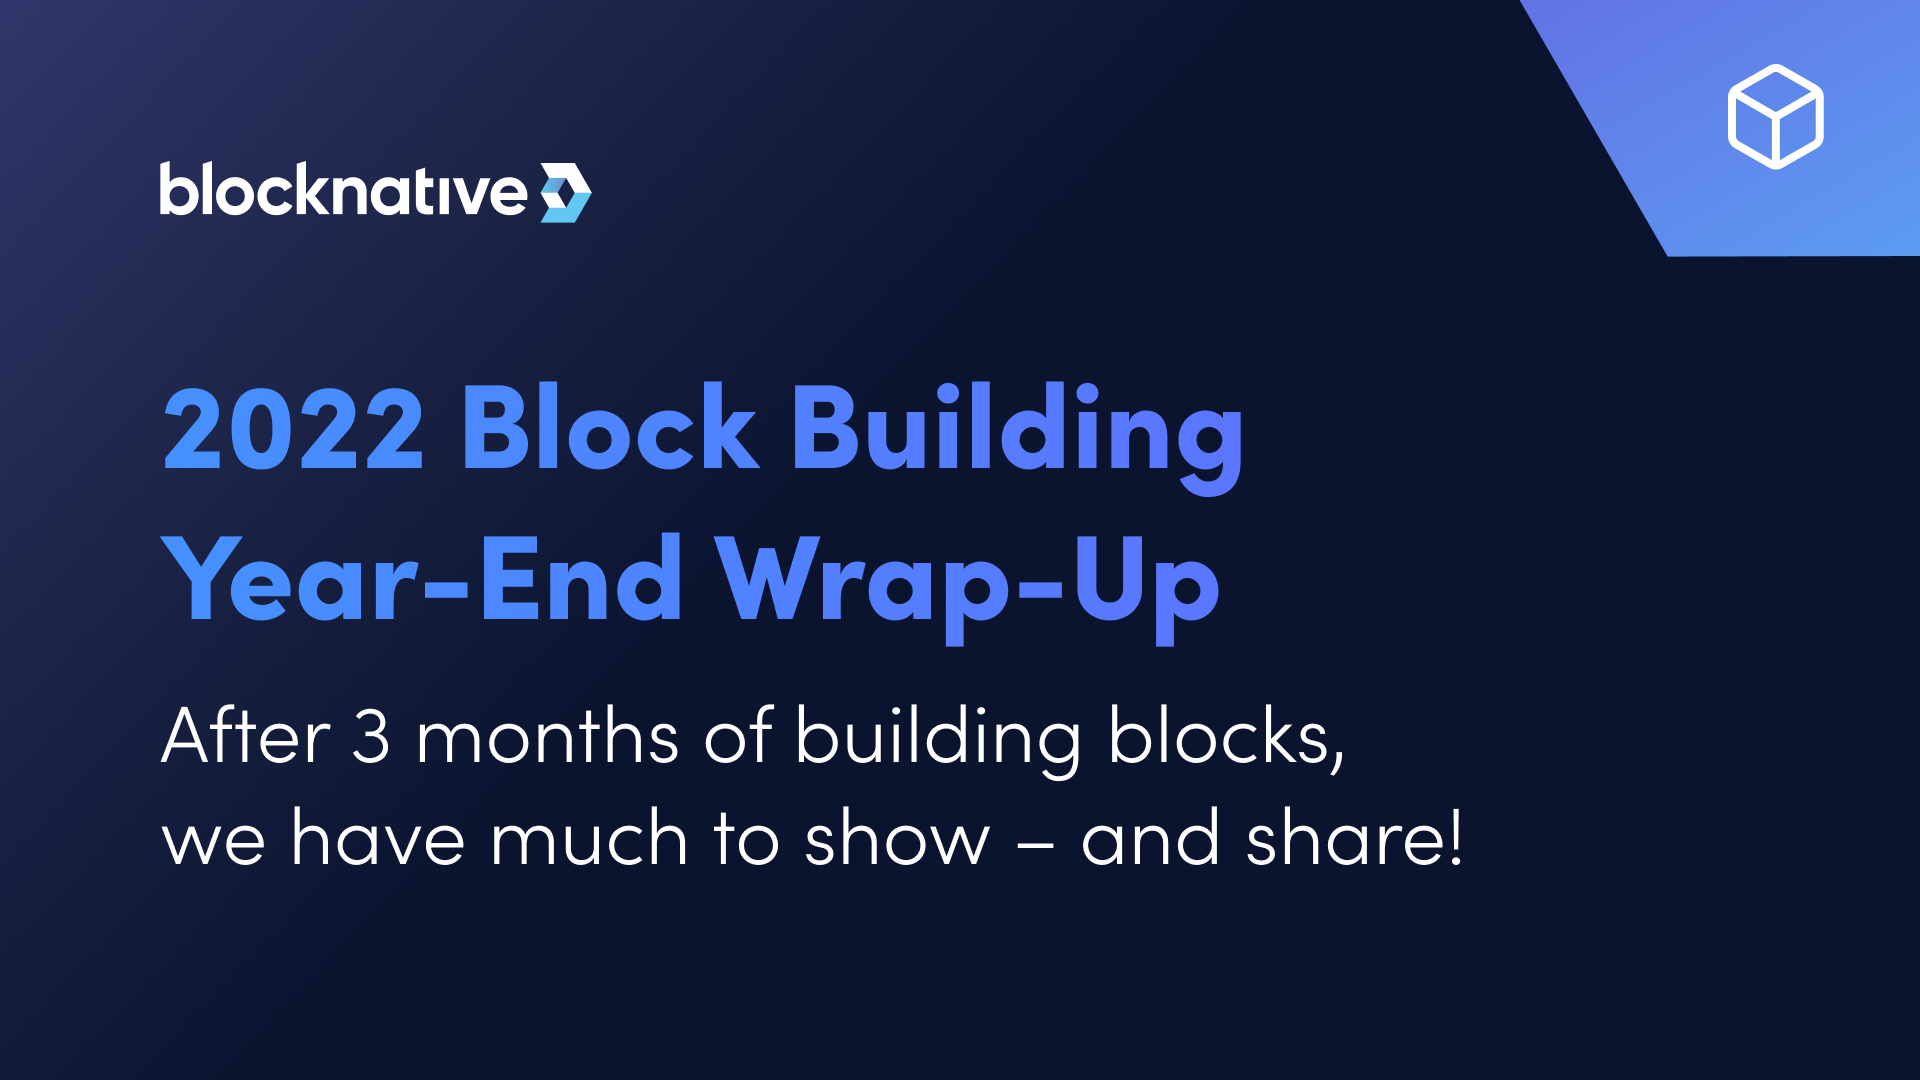 blocknative-wrapped:-2022-block-building-year-end-wrap-up